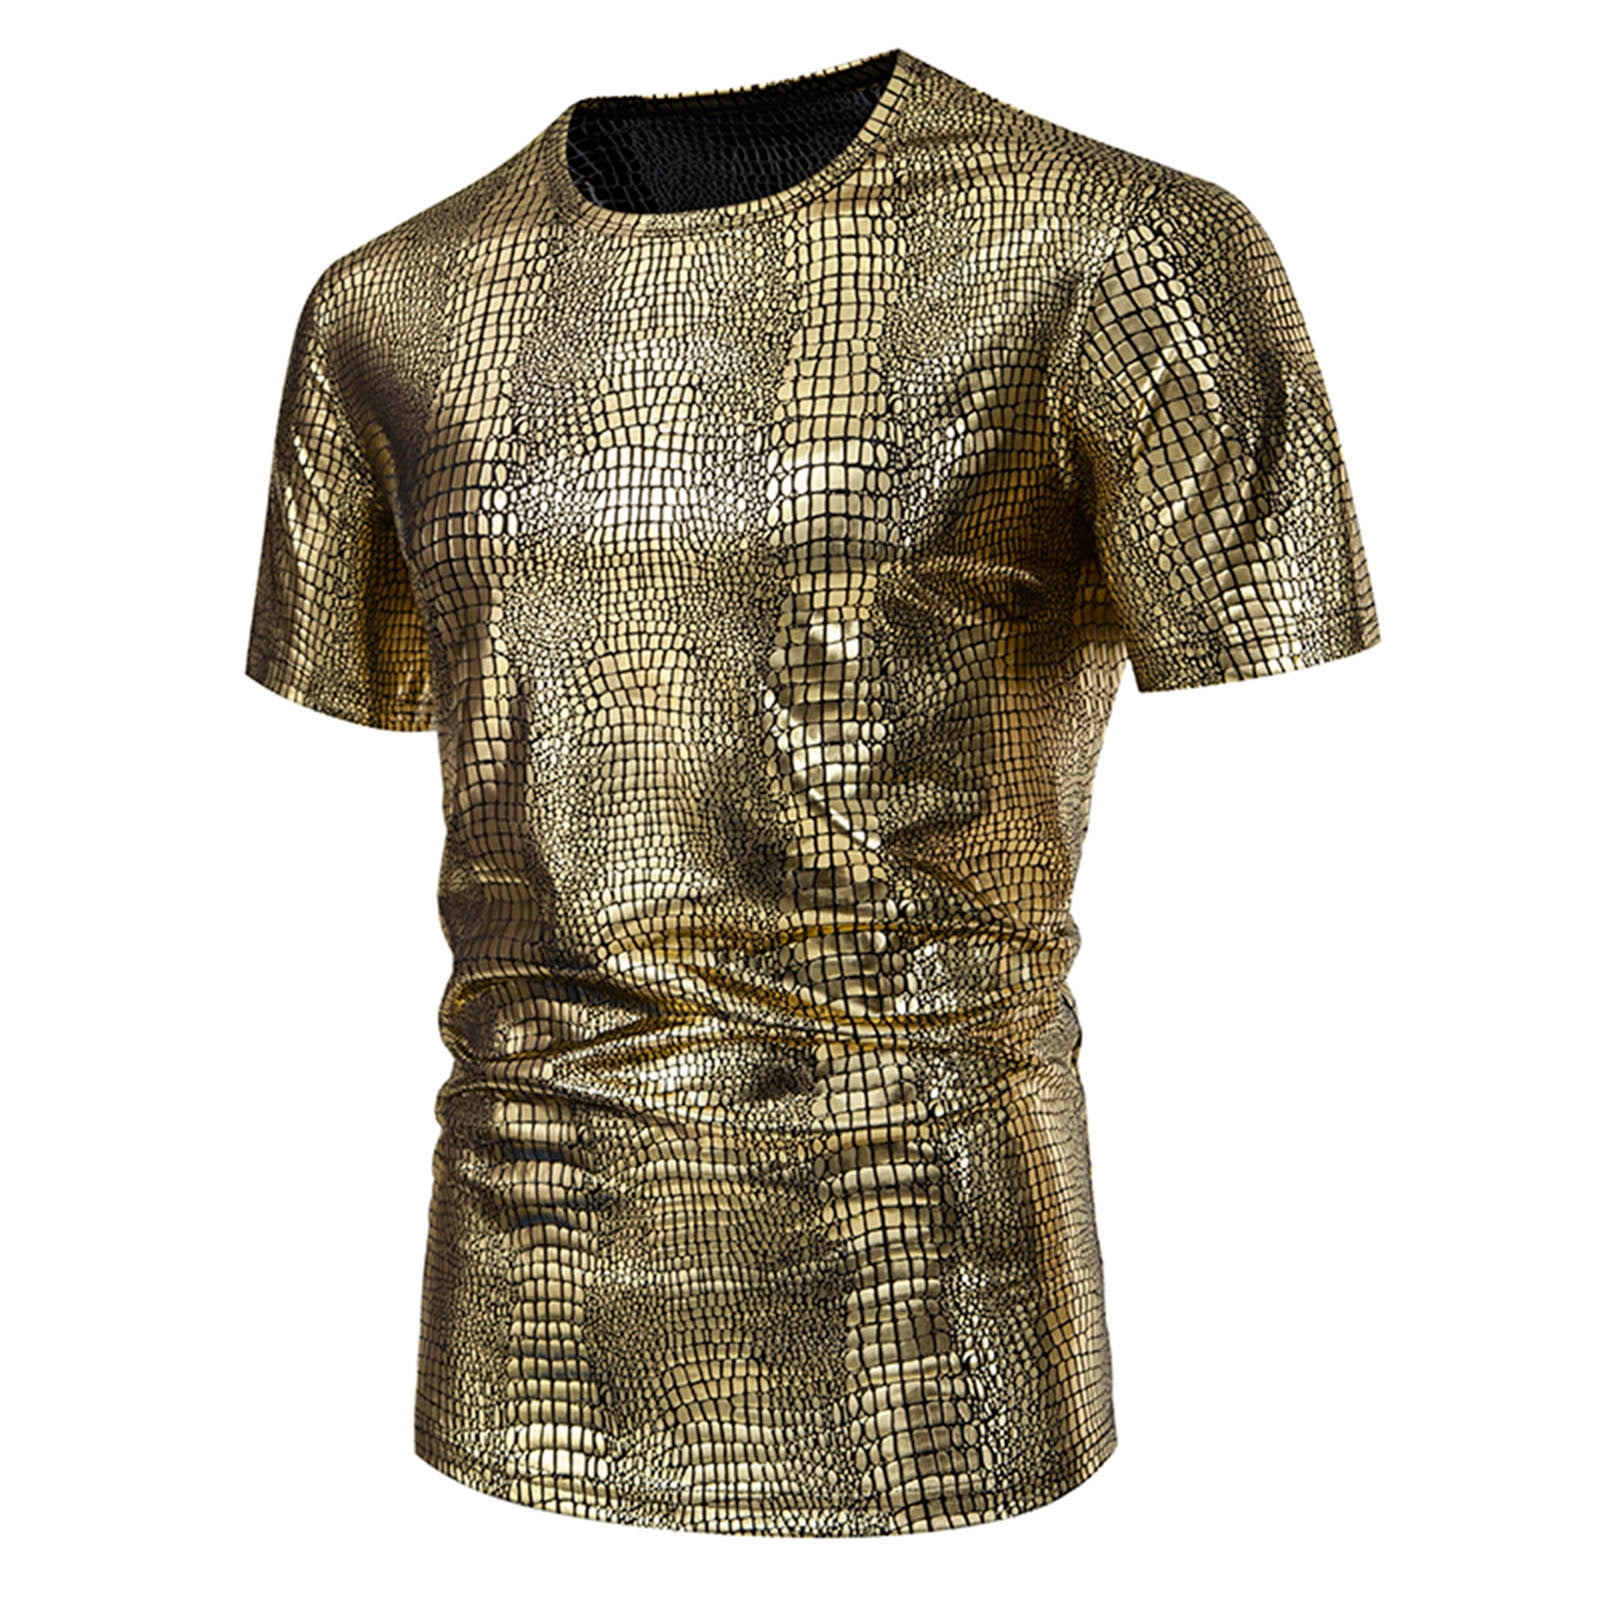 Honeeladyy Mens Sparkly Short Sleeve Shirts Summer Stage Tops Sequin ...